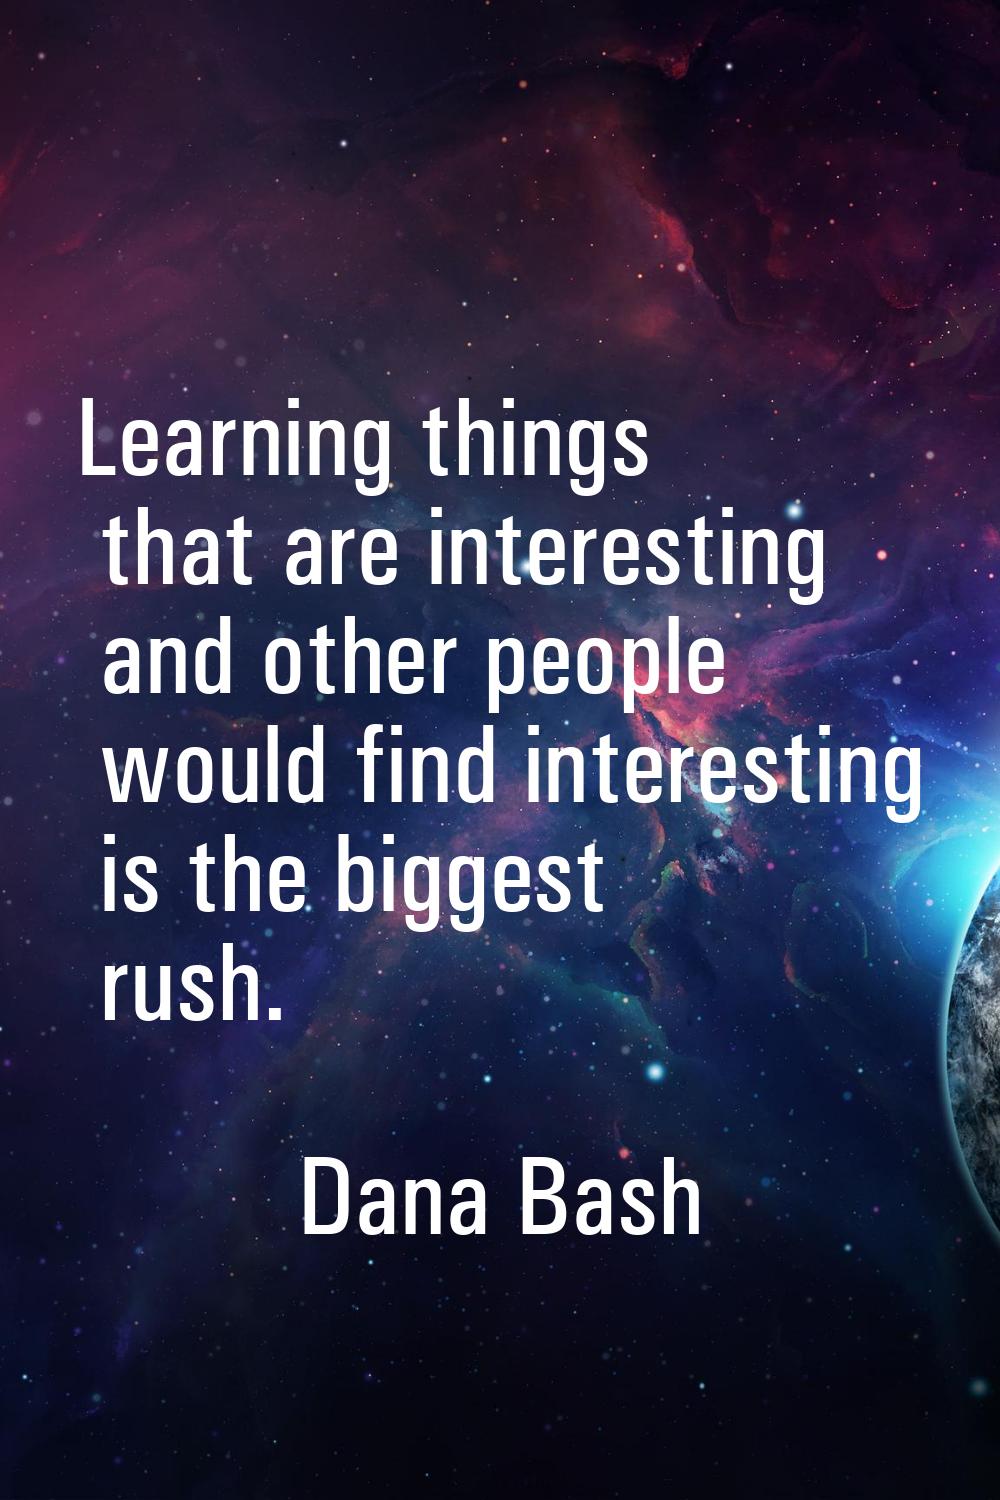 Learning things that are interesting and other people would find interesting is the biggest rush.